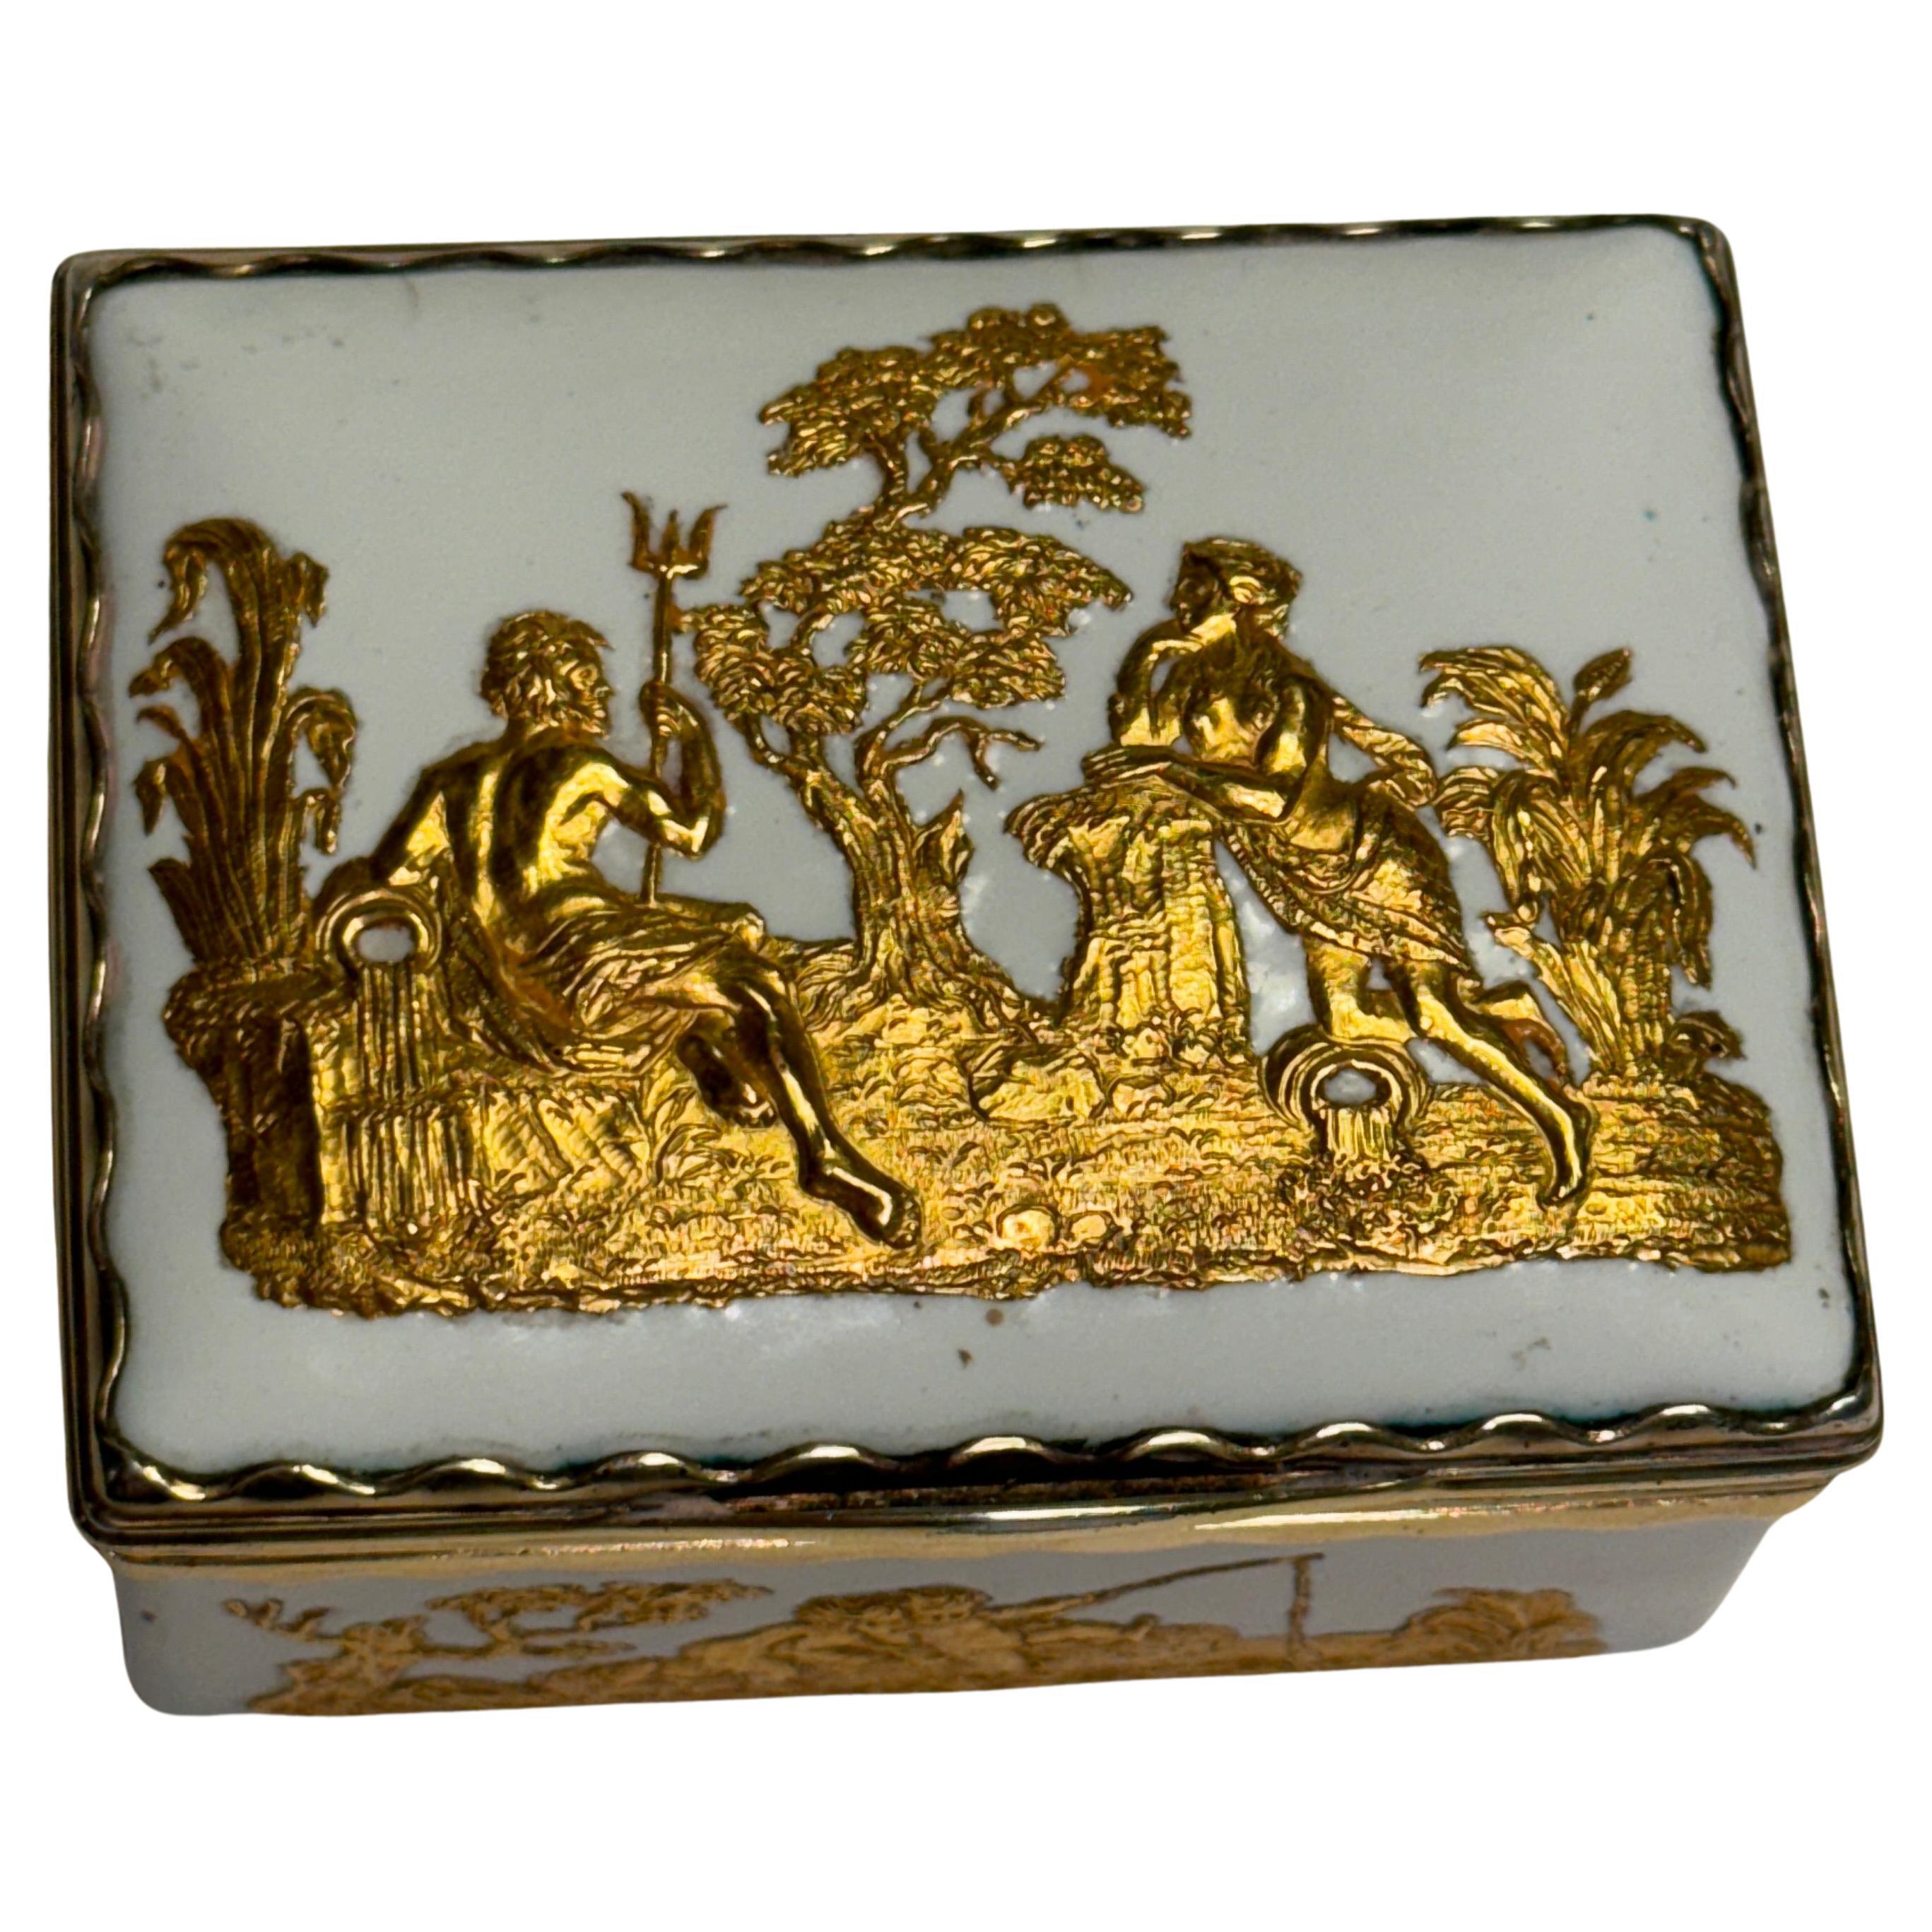 Empire 18th Century Porcelain Snuff Tobacco Box with Ormulu Gilt Decorations For Sale